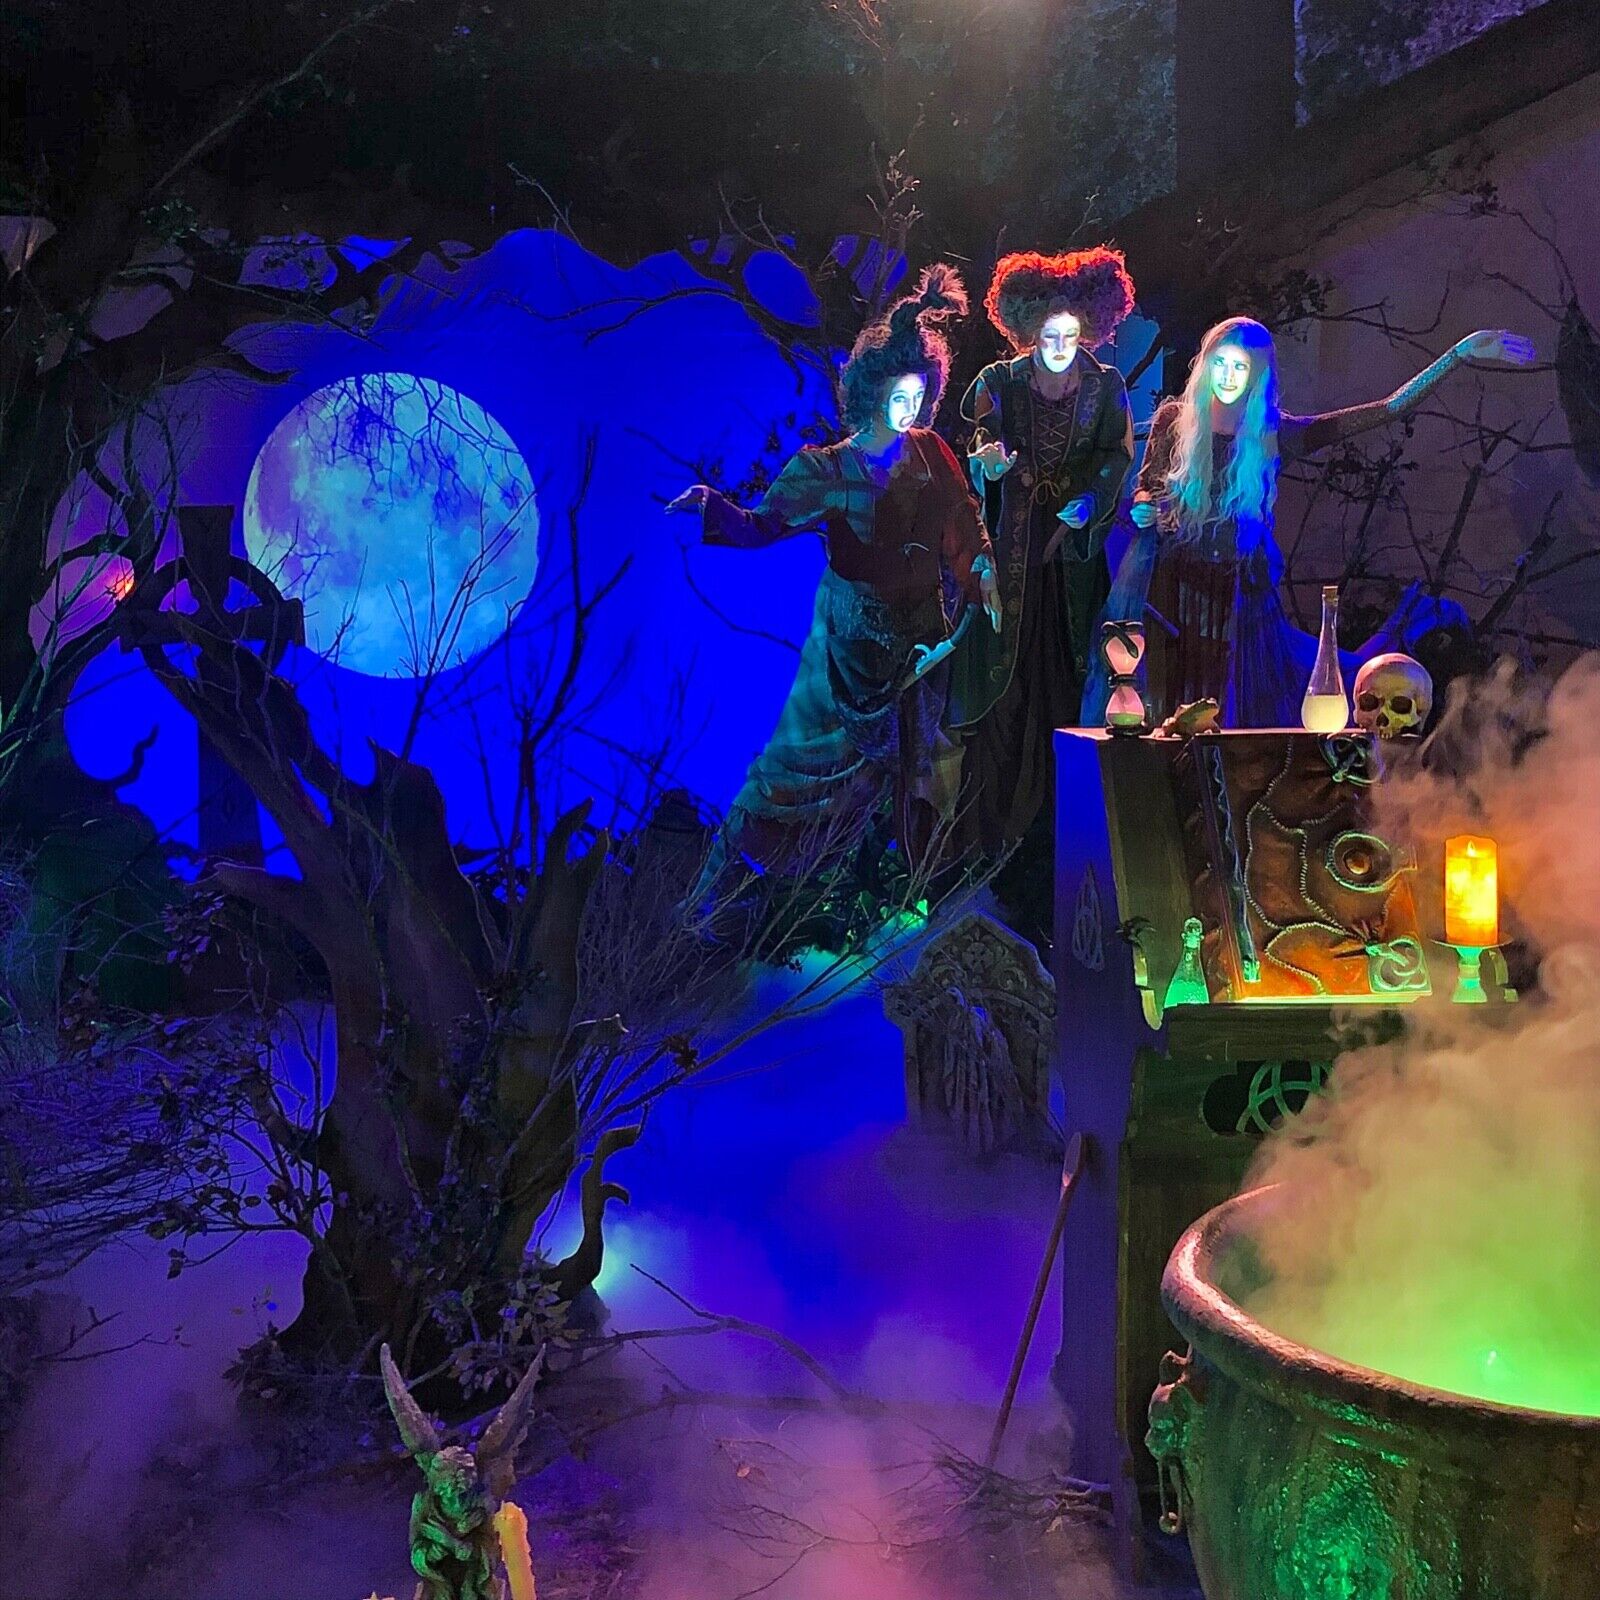  Halloween Haunt Hocus Pocus complete projection show, created by an Imagineer 